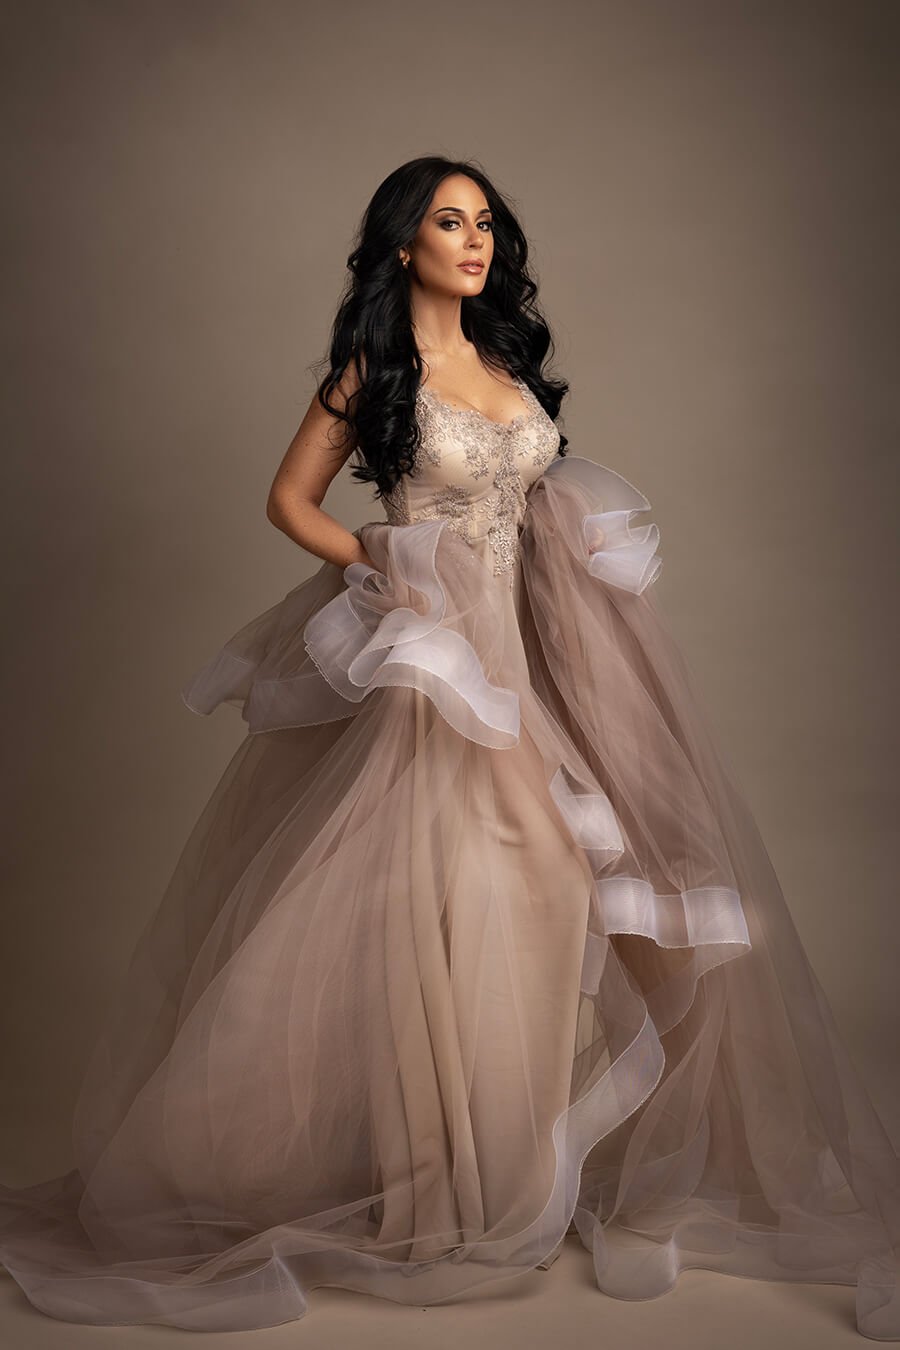 brunette model poses in a studio during a glamour photoshoot. she has a long tulle dress with a lot of bridal lace details on the top. 